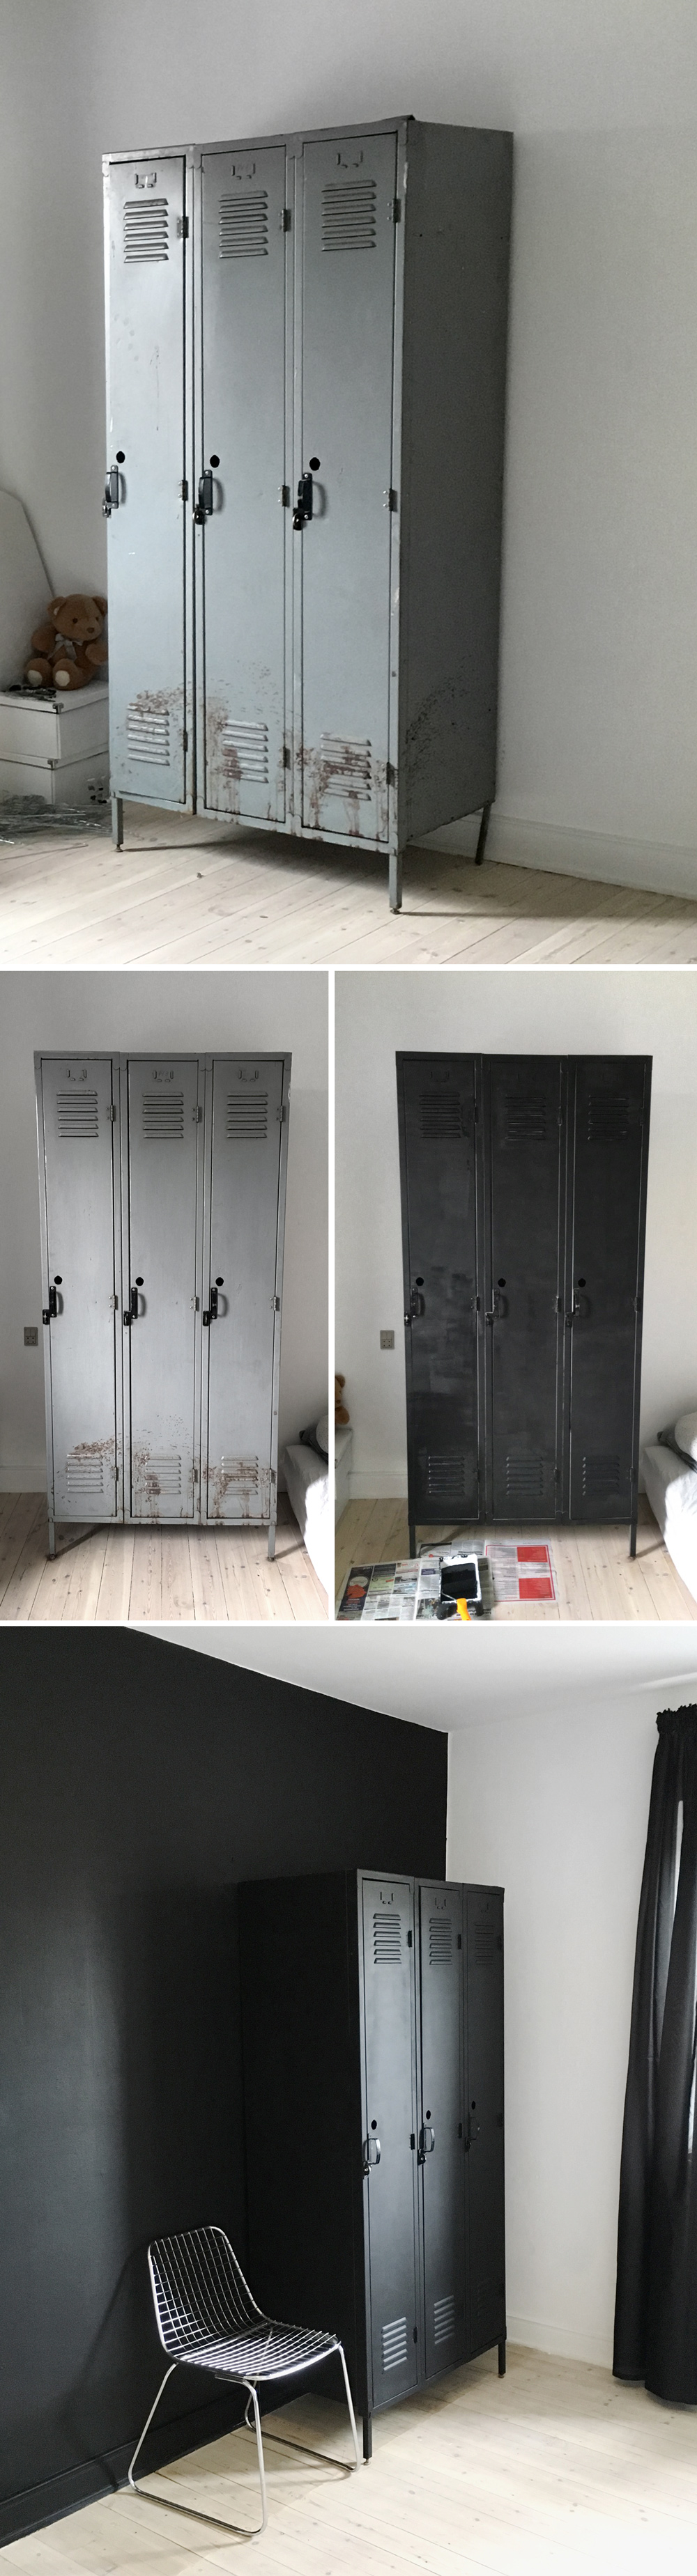 Locker before and after